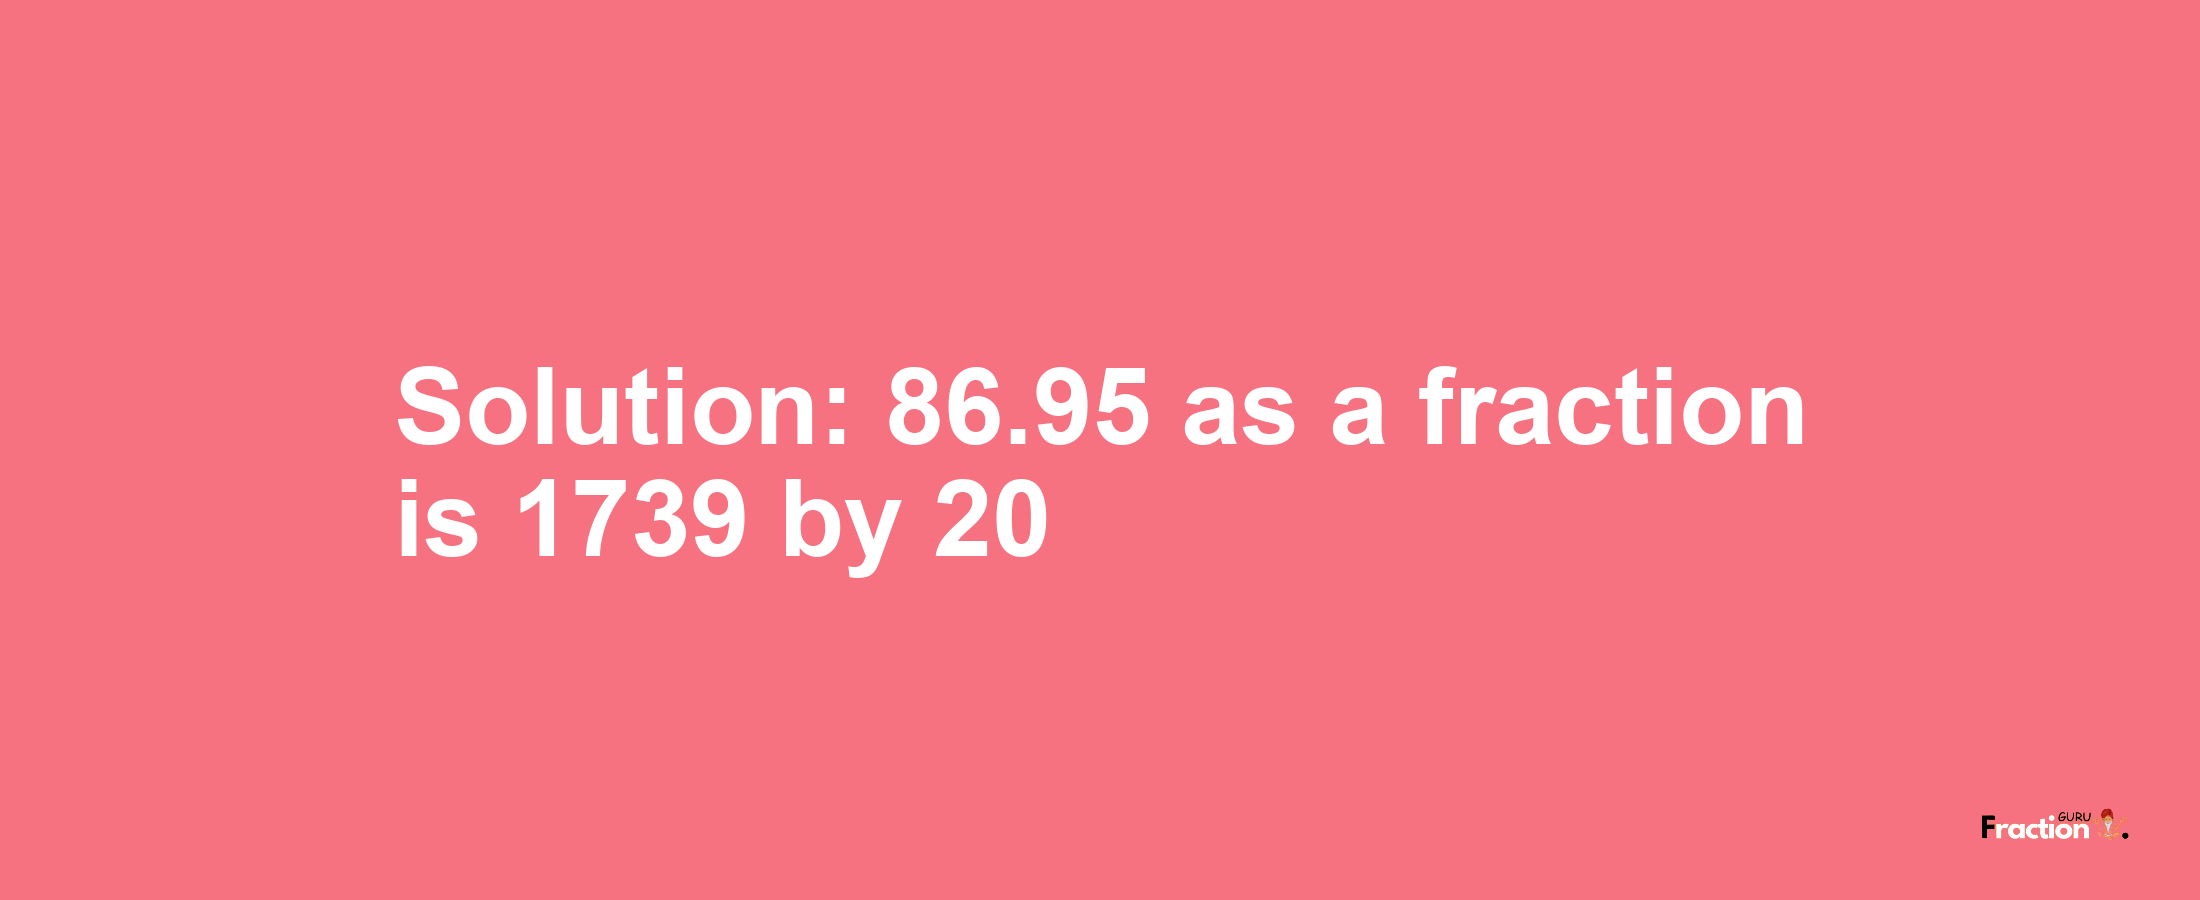 Solution:86.95 as a fraction is 1739/20